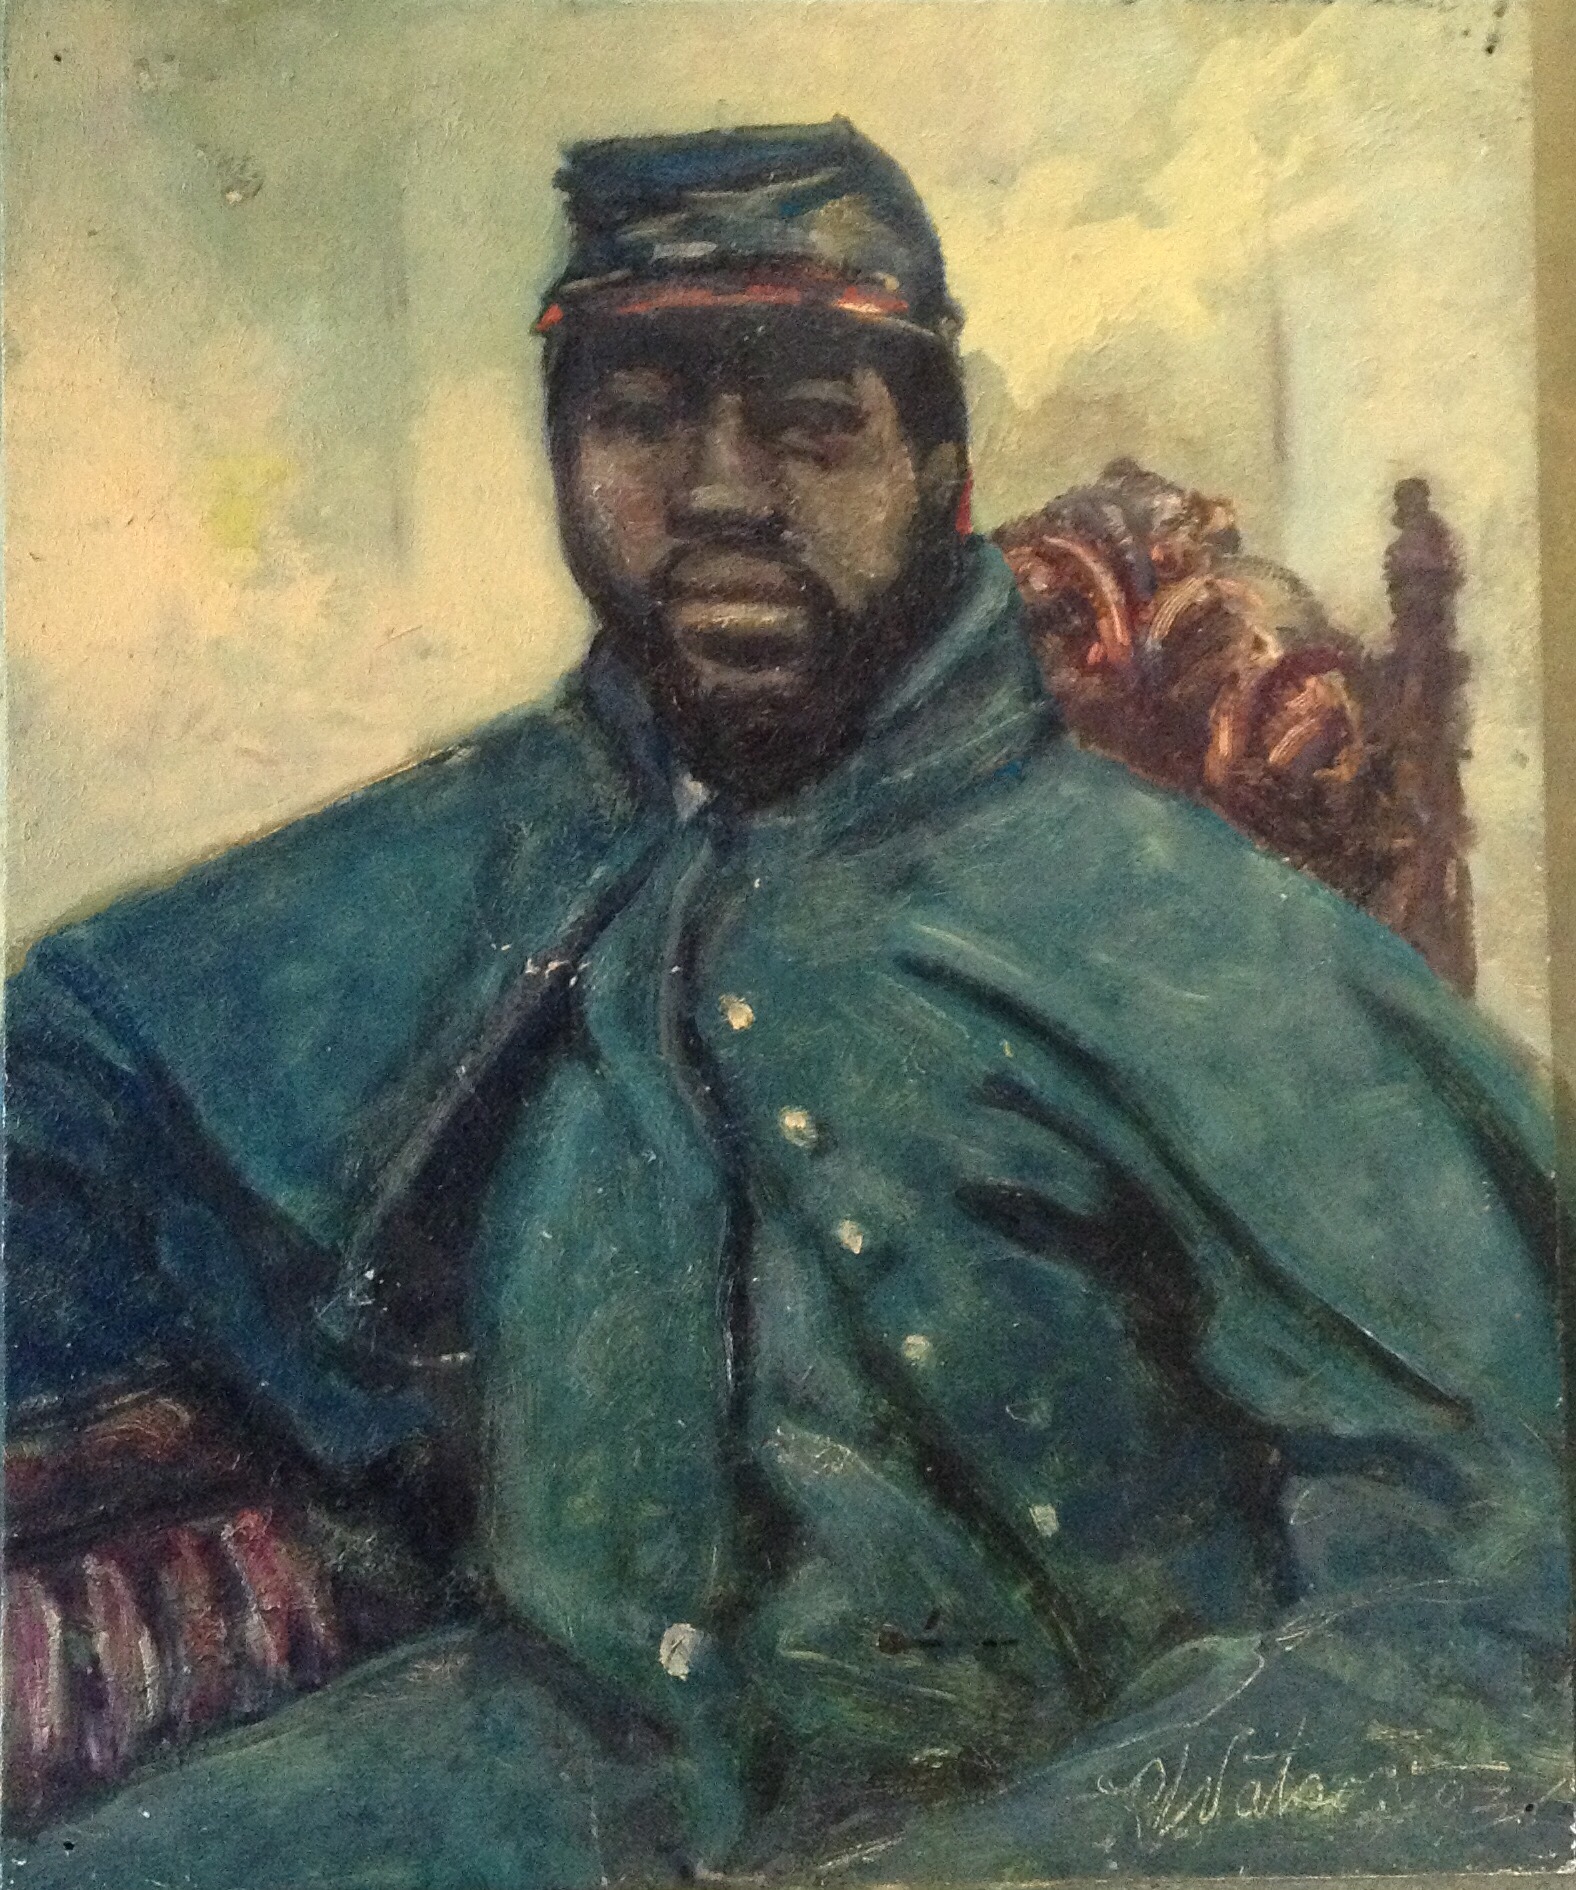 Old Soldier, oil on wood panel, 11" x 9"